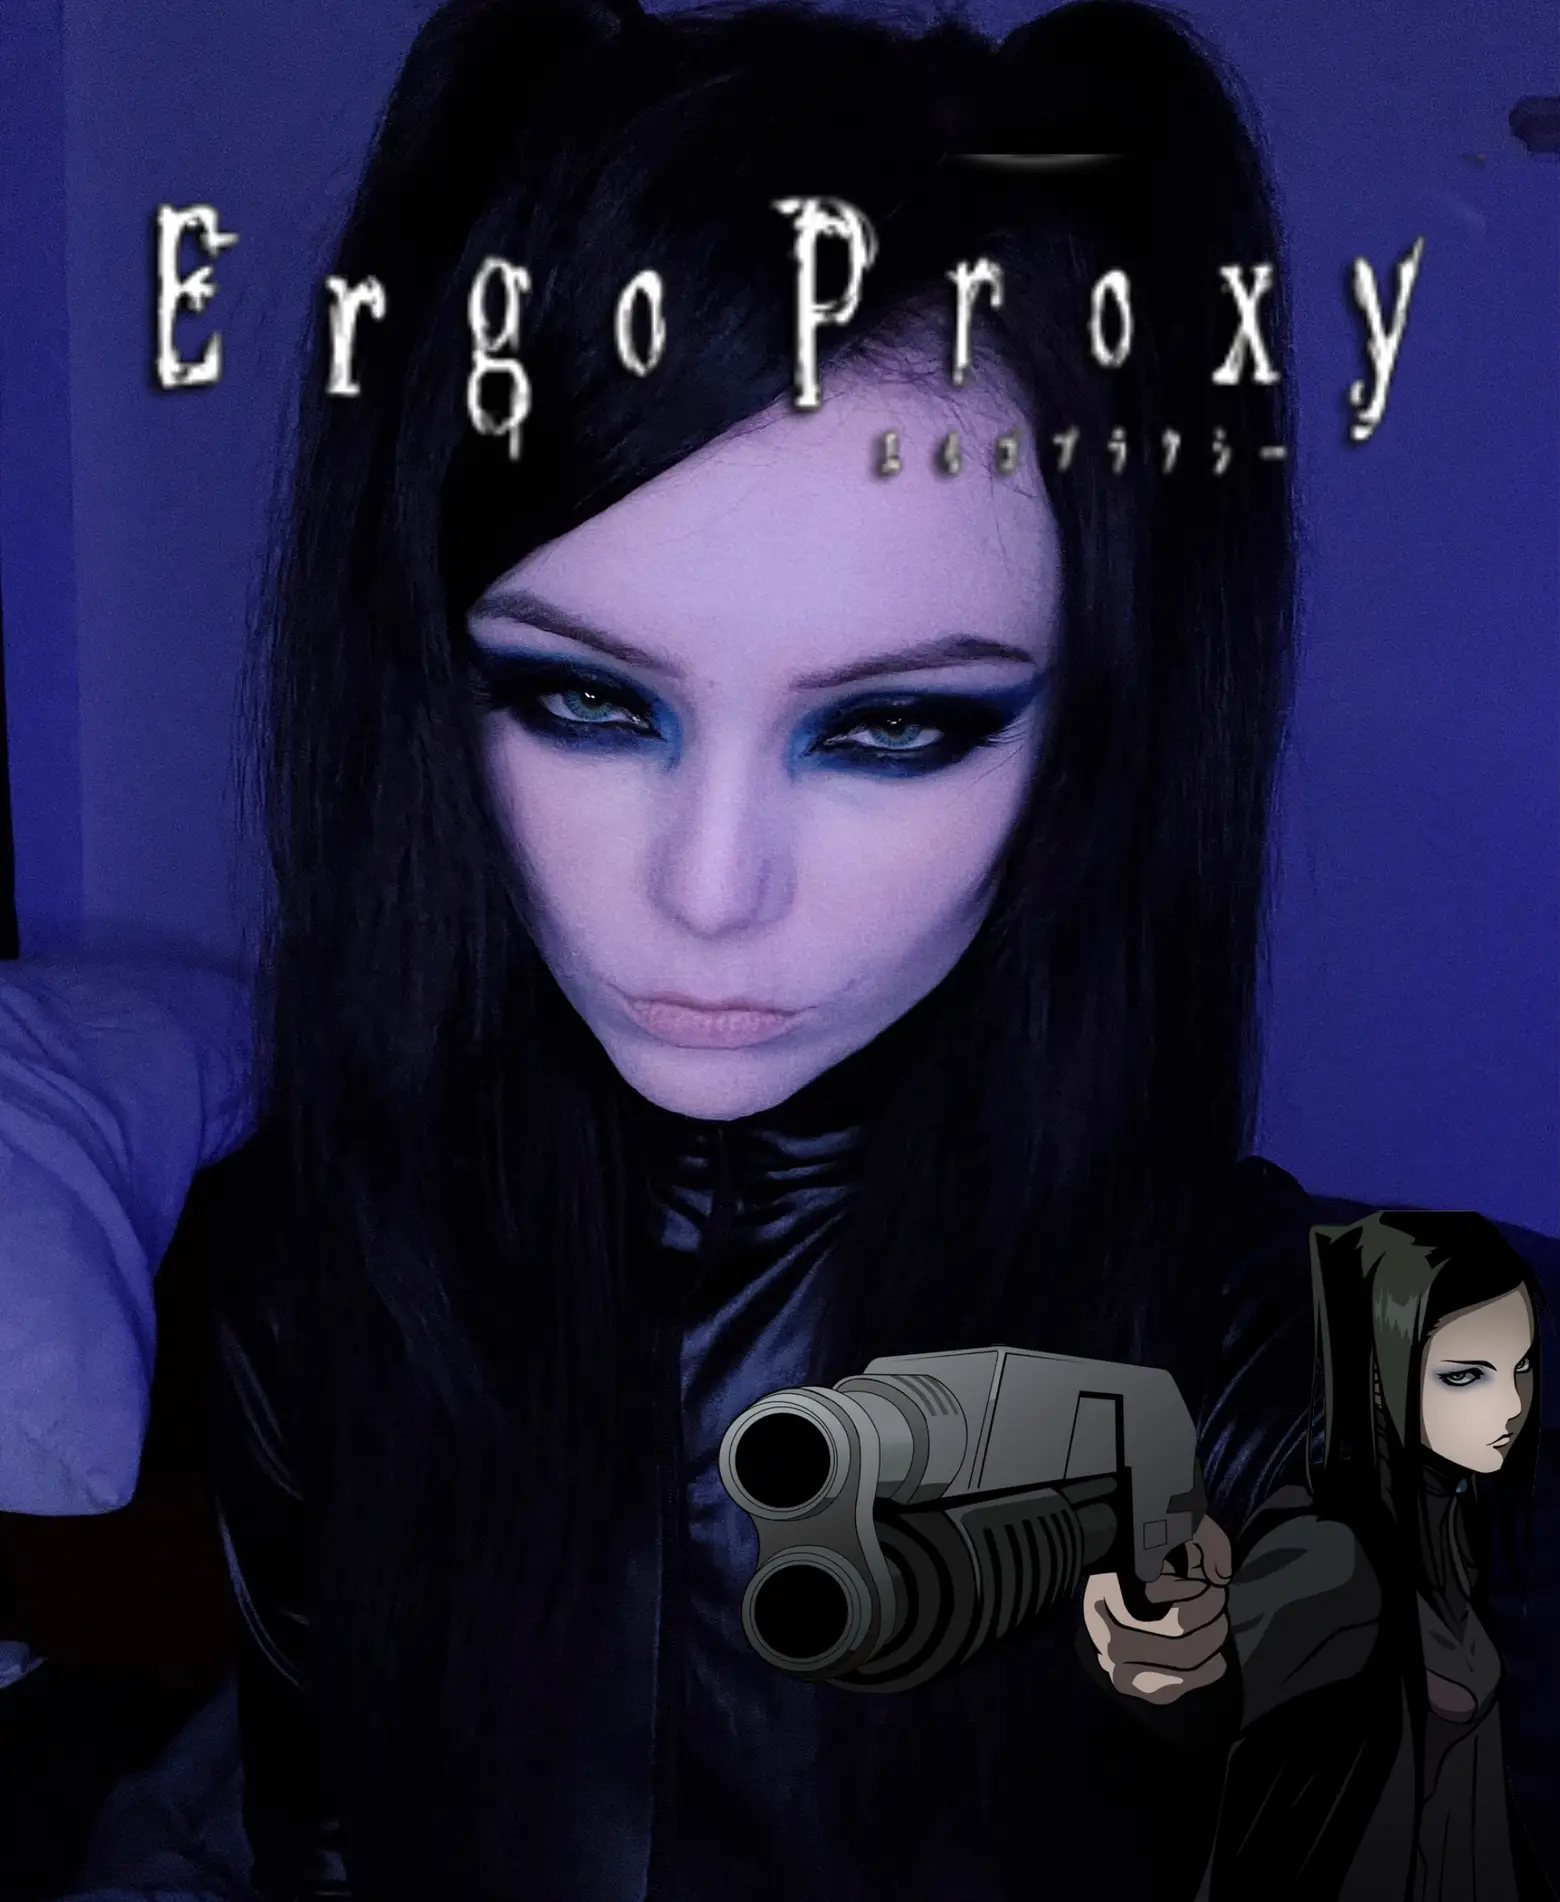 Ergo Proxy Inspired Makeup, Gallery posted by Ariana Adams🥀